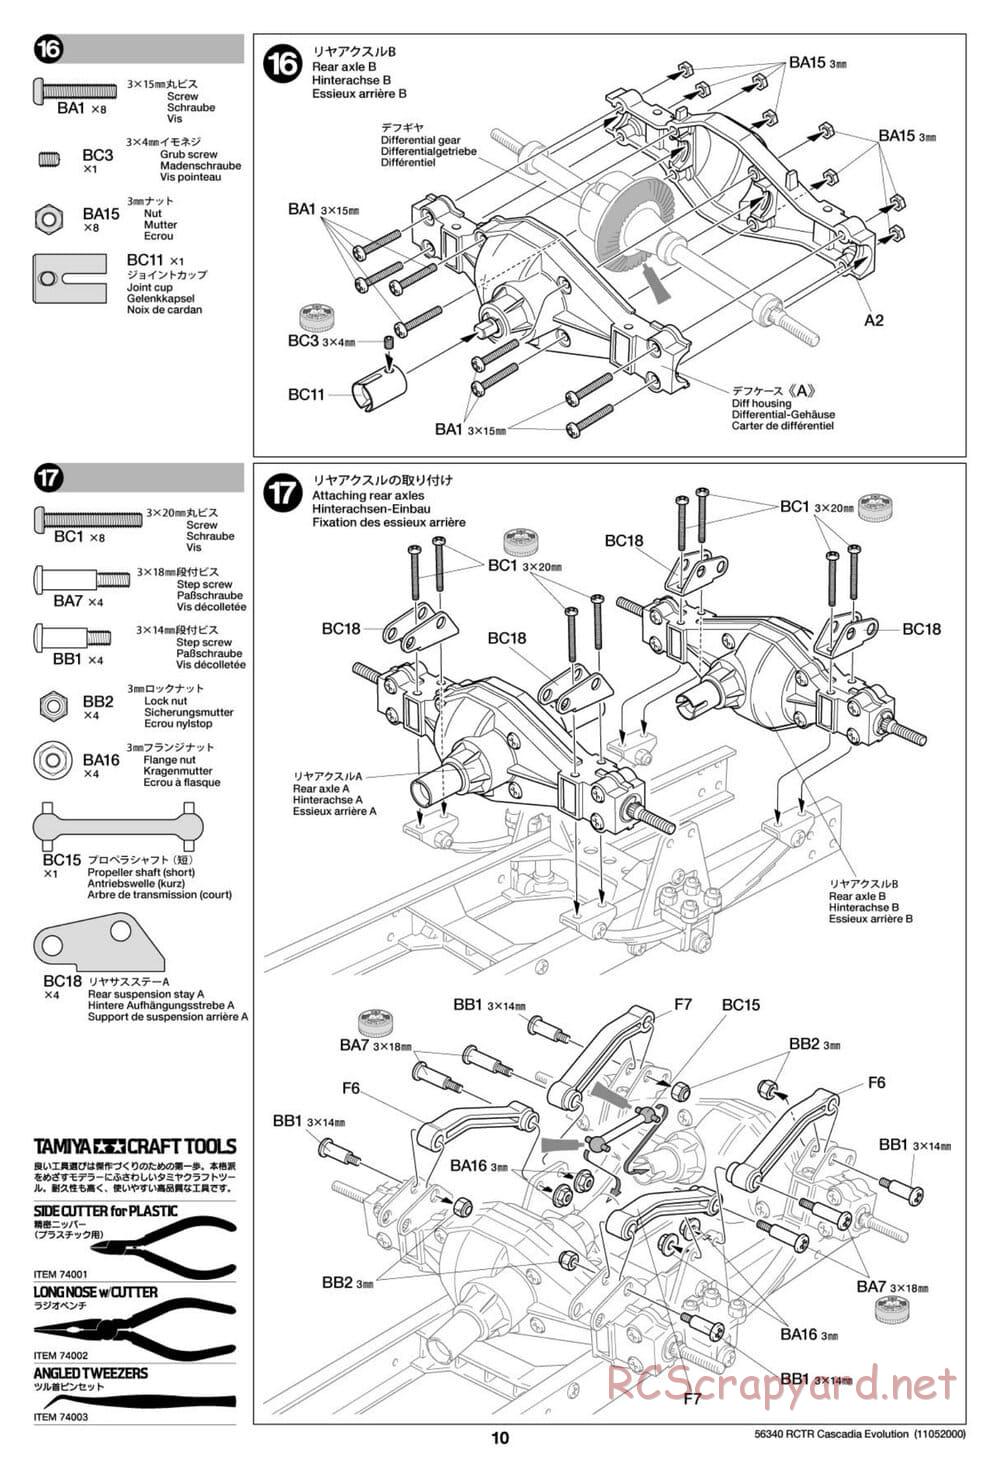 Tamiya - Freightliner Cascadia Evolution Tractor Truck Chassis - Manual - Page 10